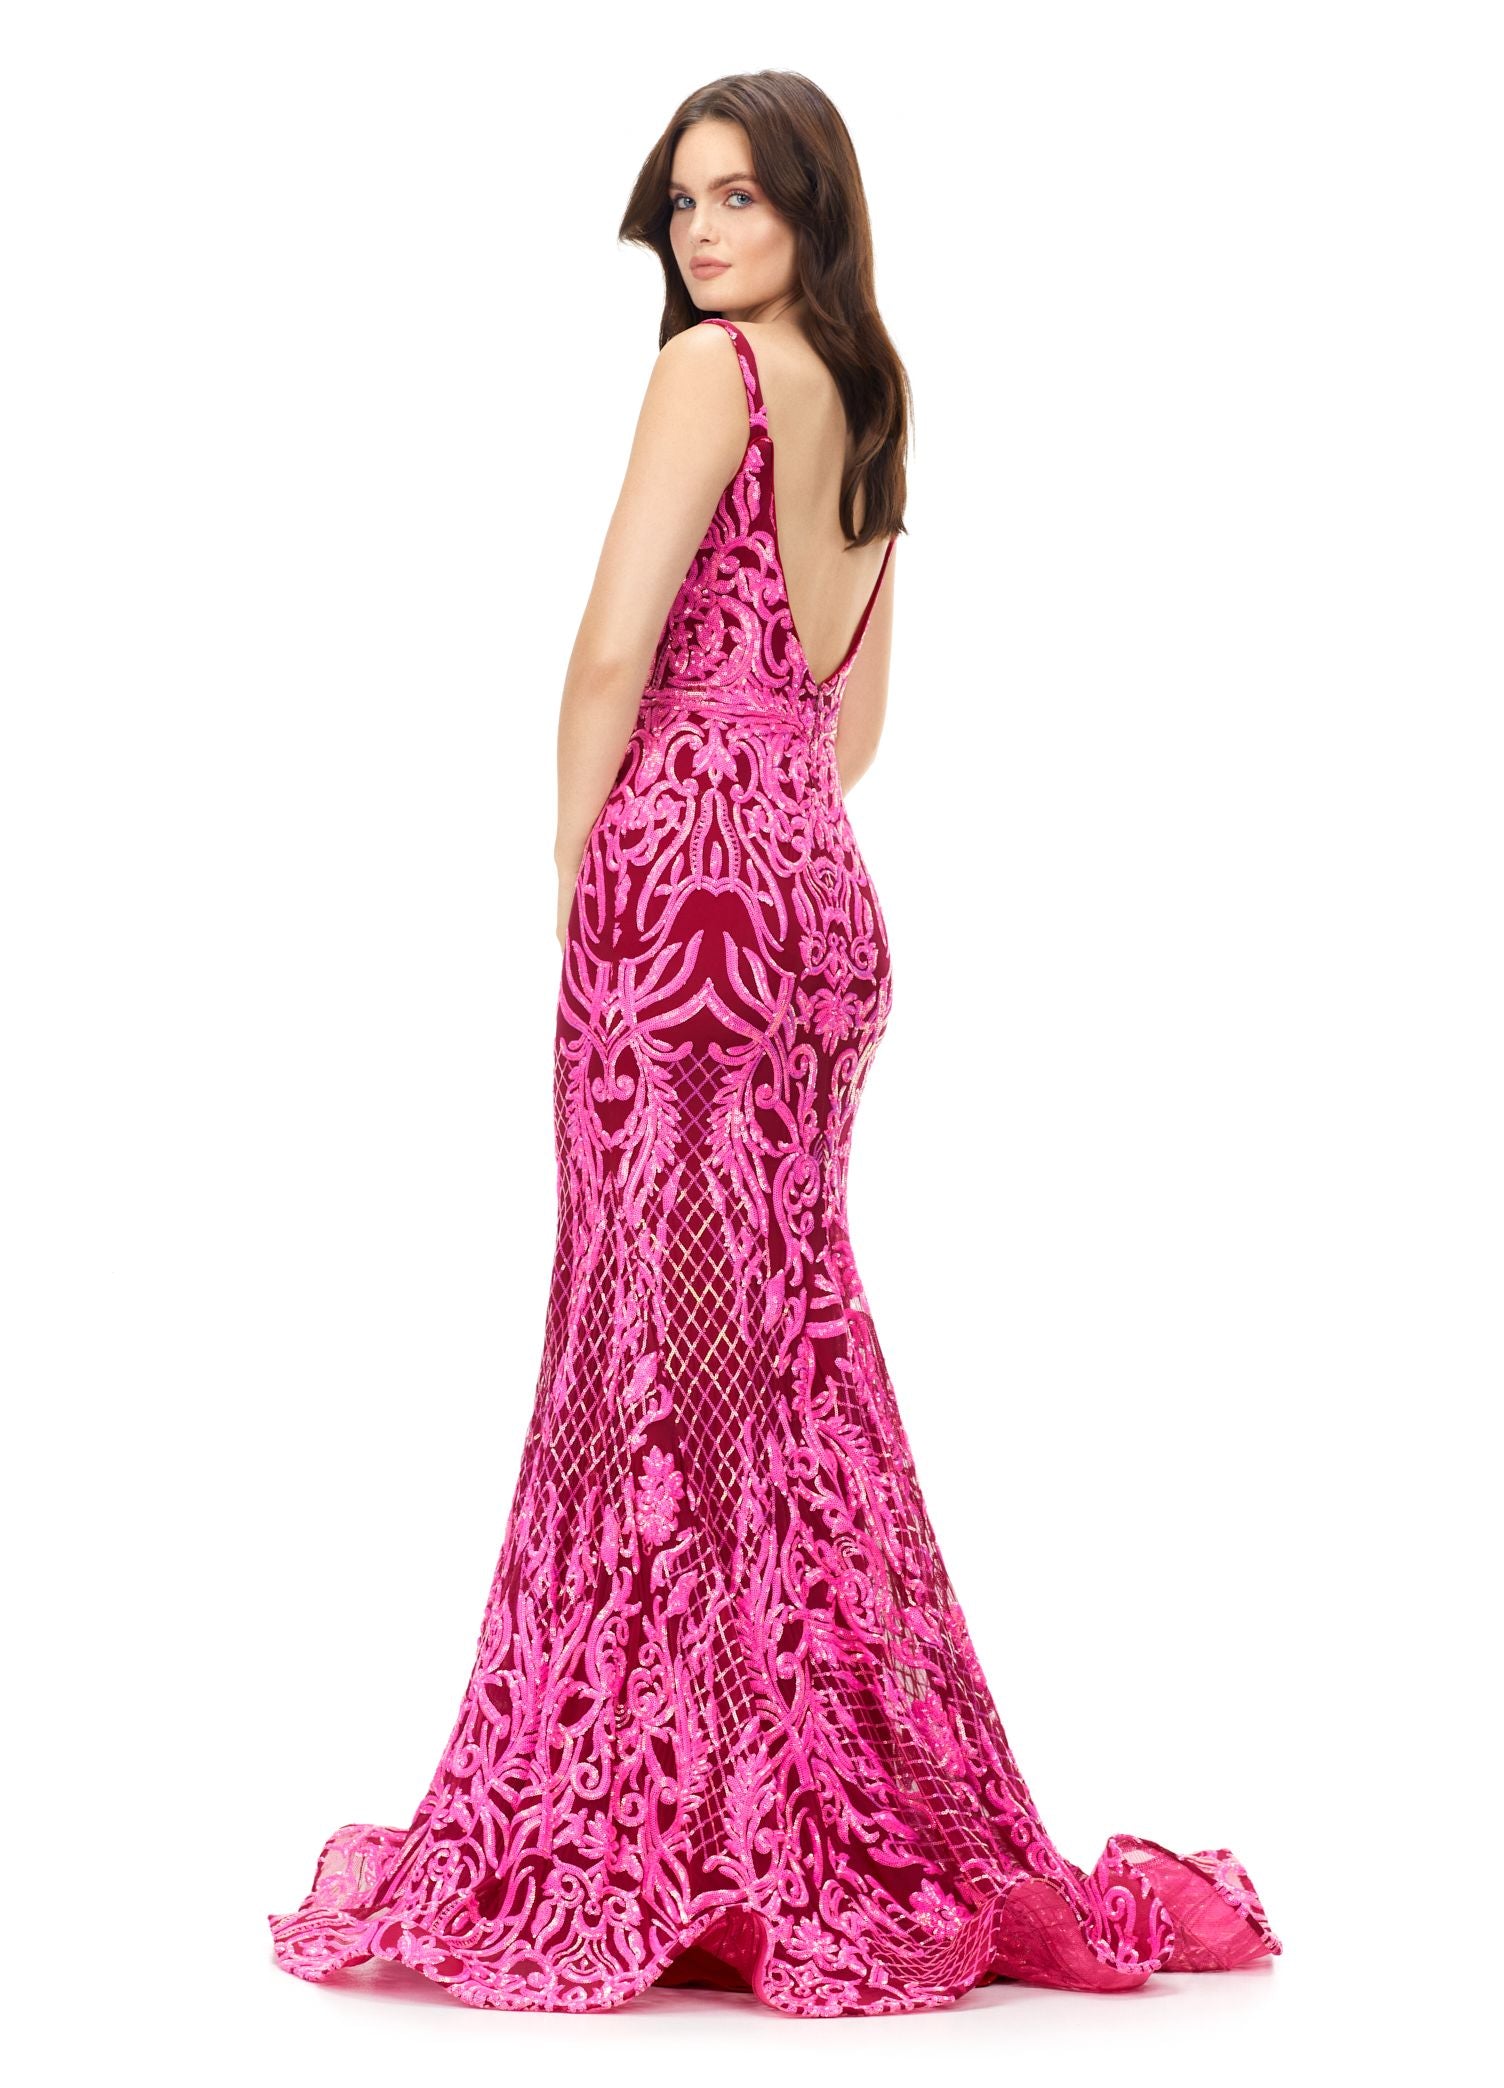 Ashley Lauren 11113 Burgundy Long Fitted Sequin Formal Prom Dress Pageant Gown V Neck Make a statement in this spaghetti strap stretch sequin gown. The bustier of the dress is accented by an illusion V-Neckline and deep V-Back. The skirt is finished with an horsehair hem.